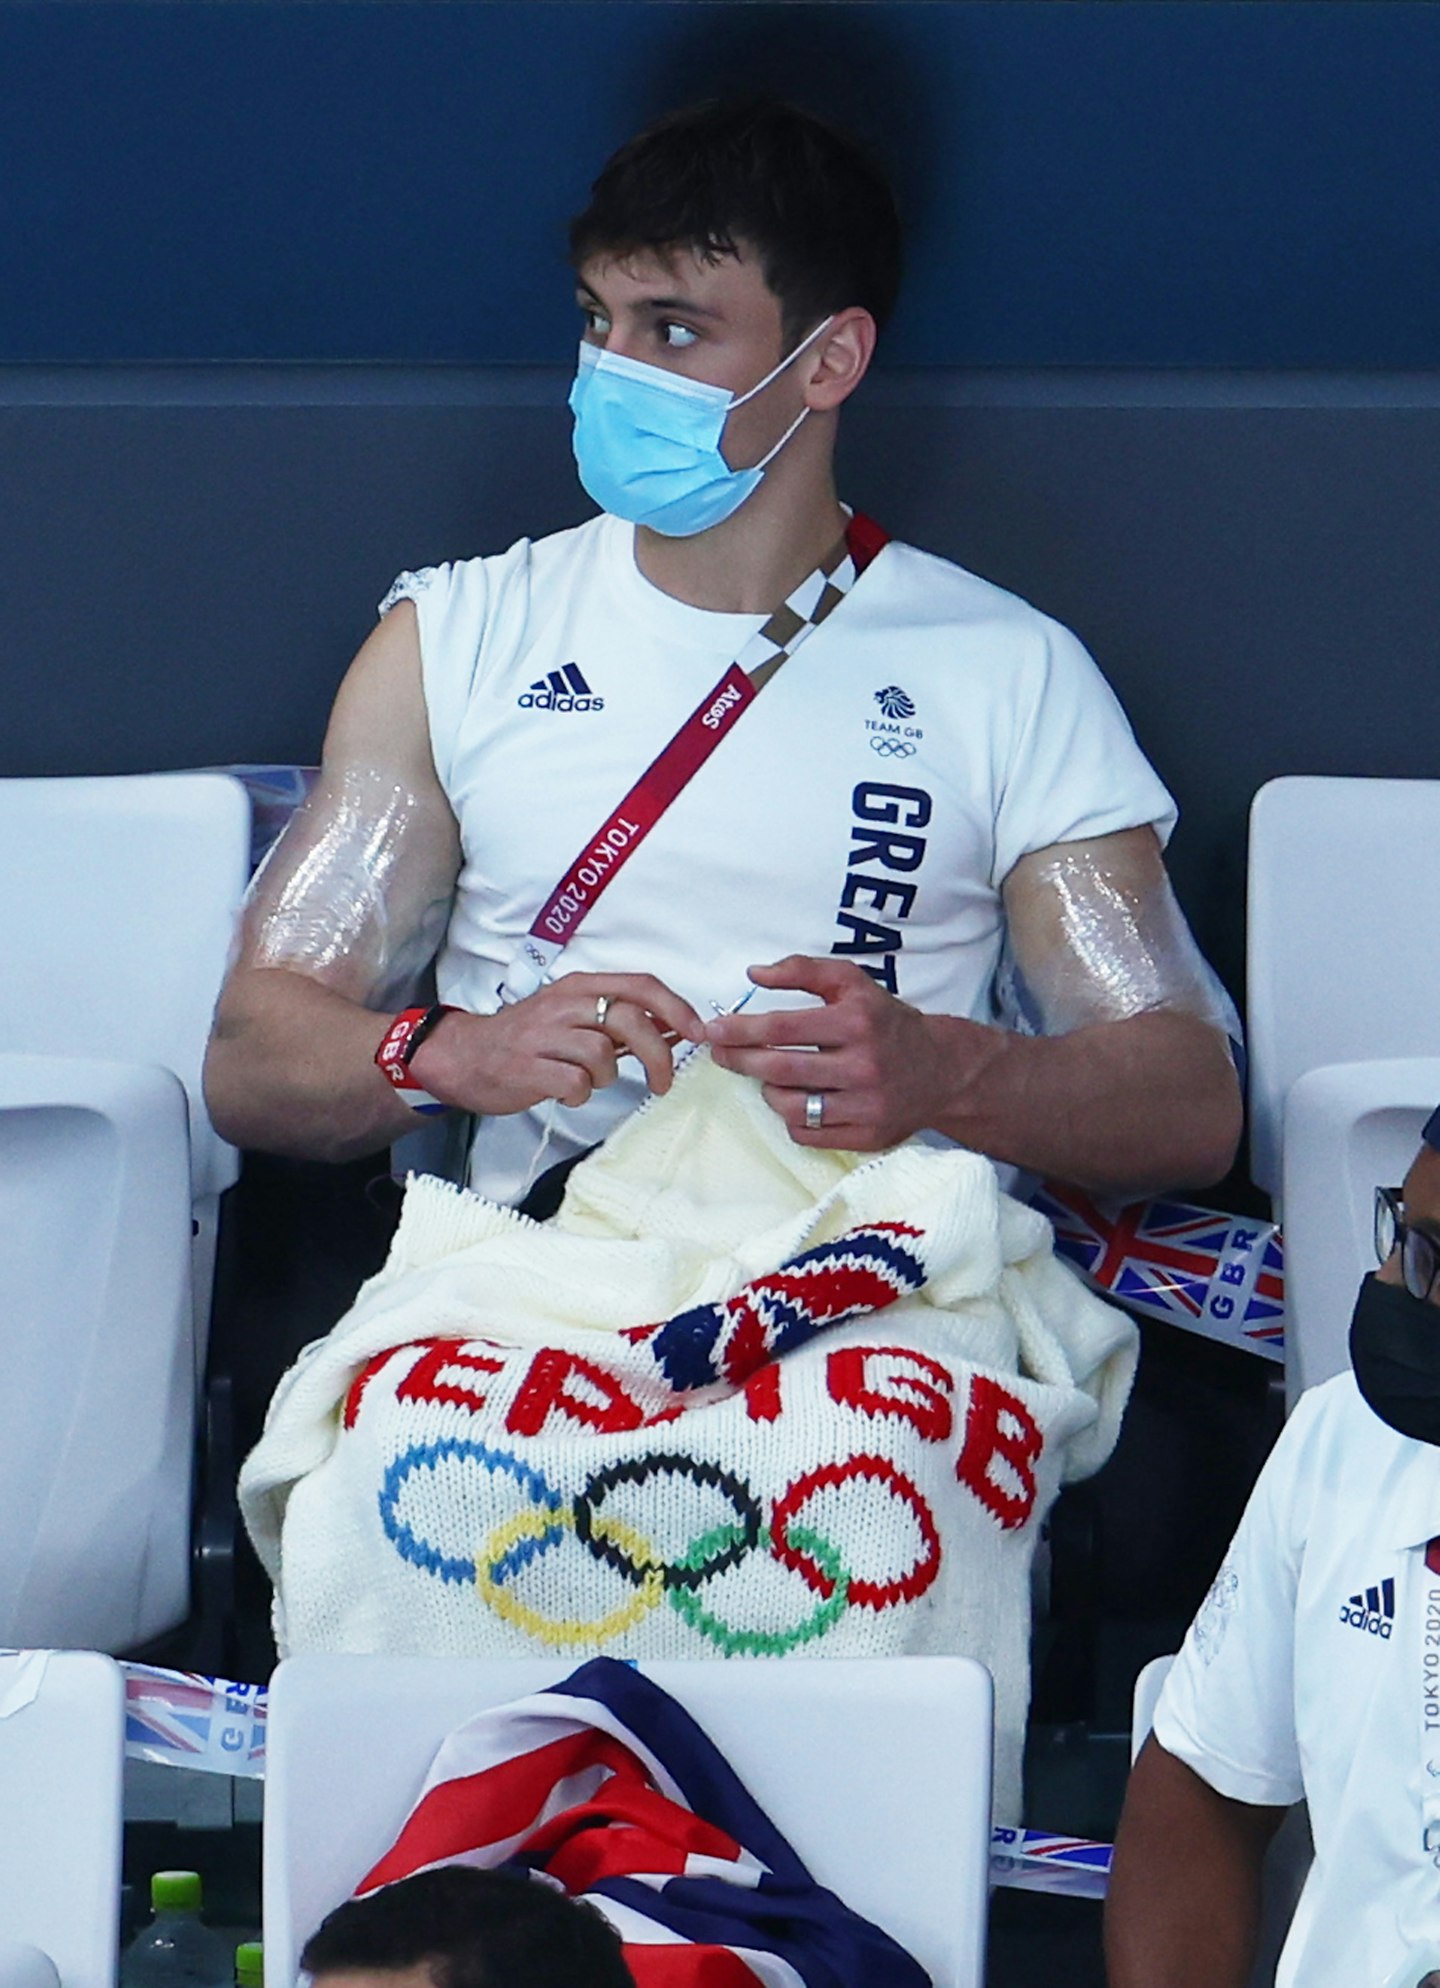 Tom Daley knitting at the Olympics 